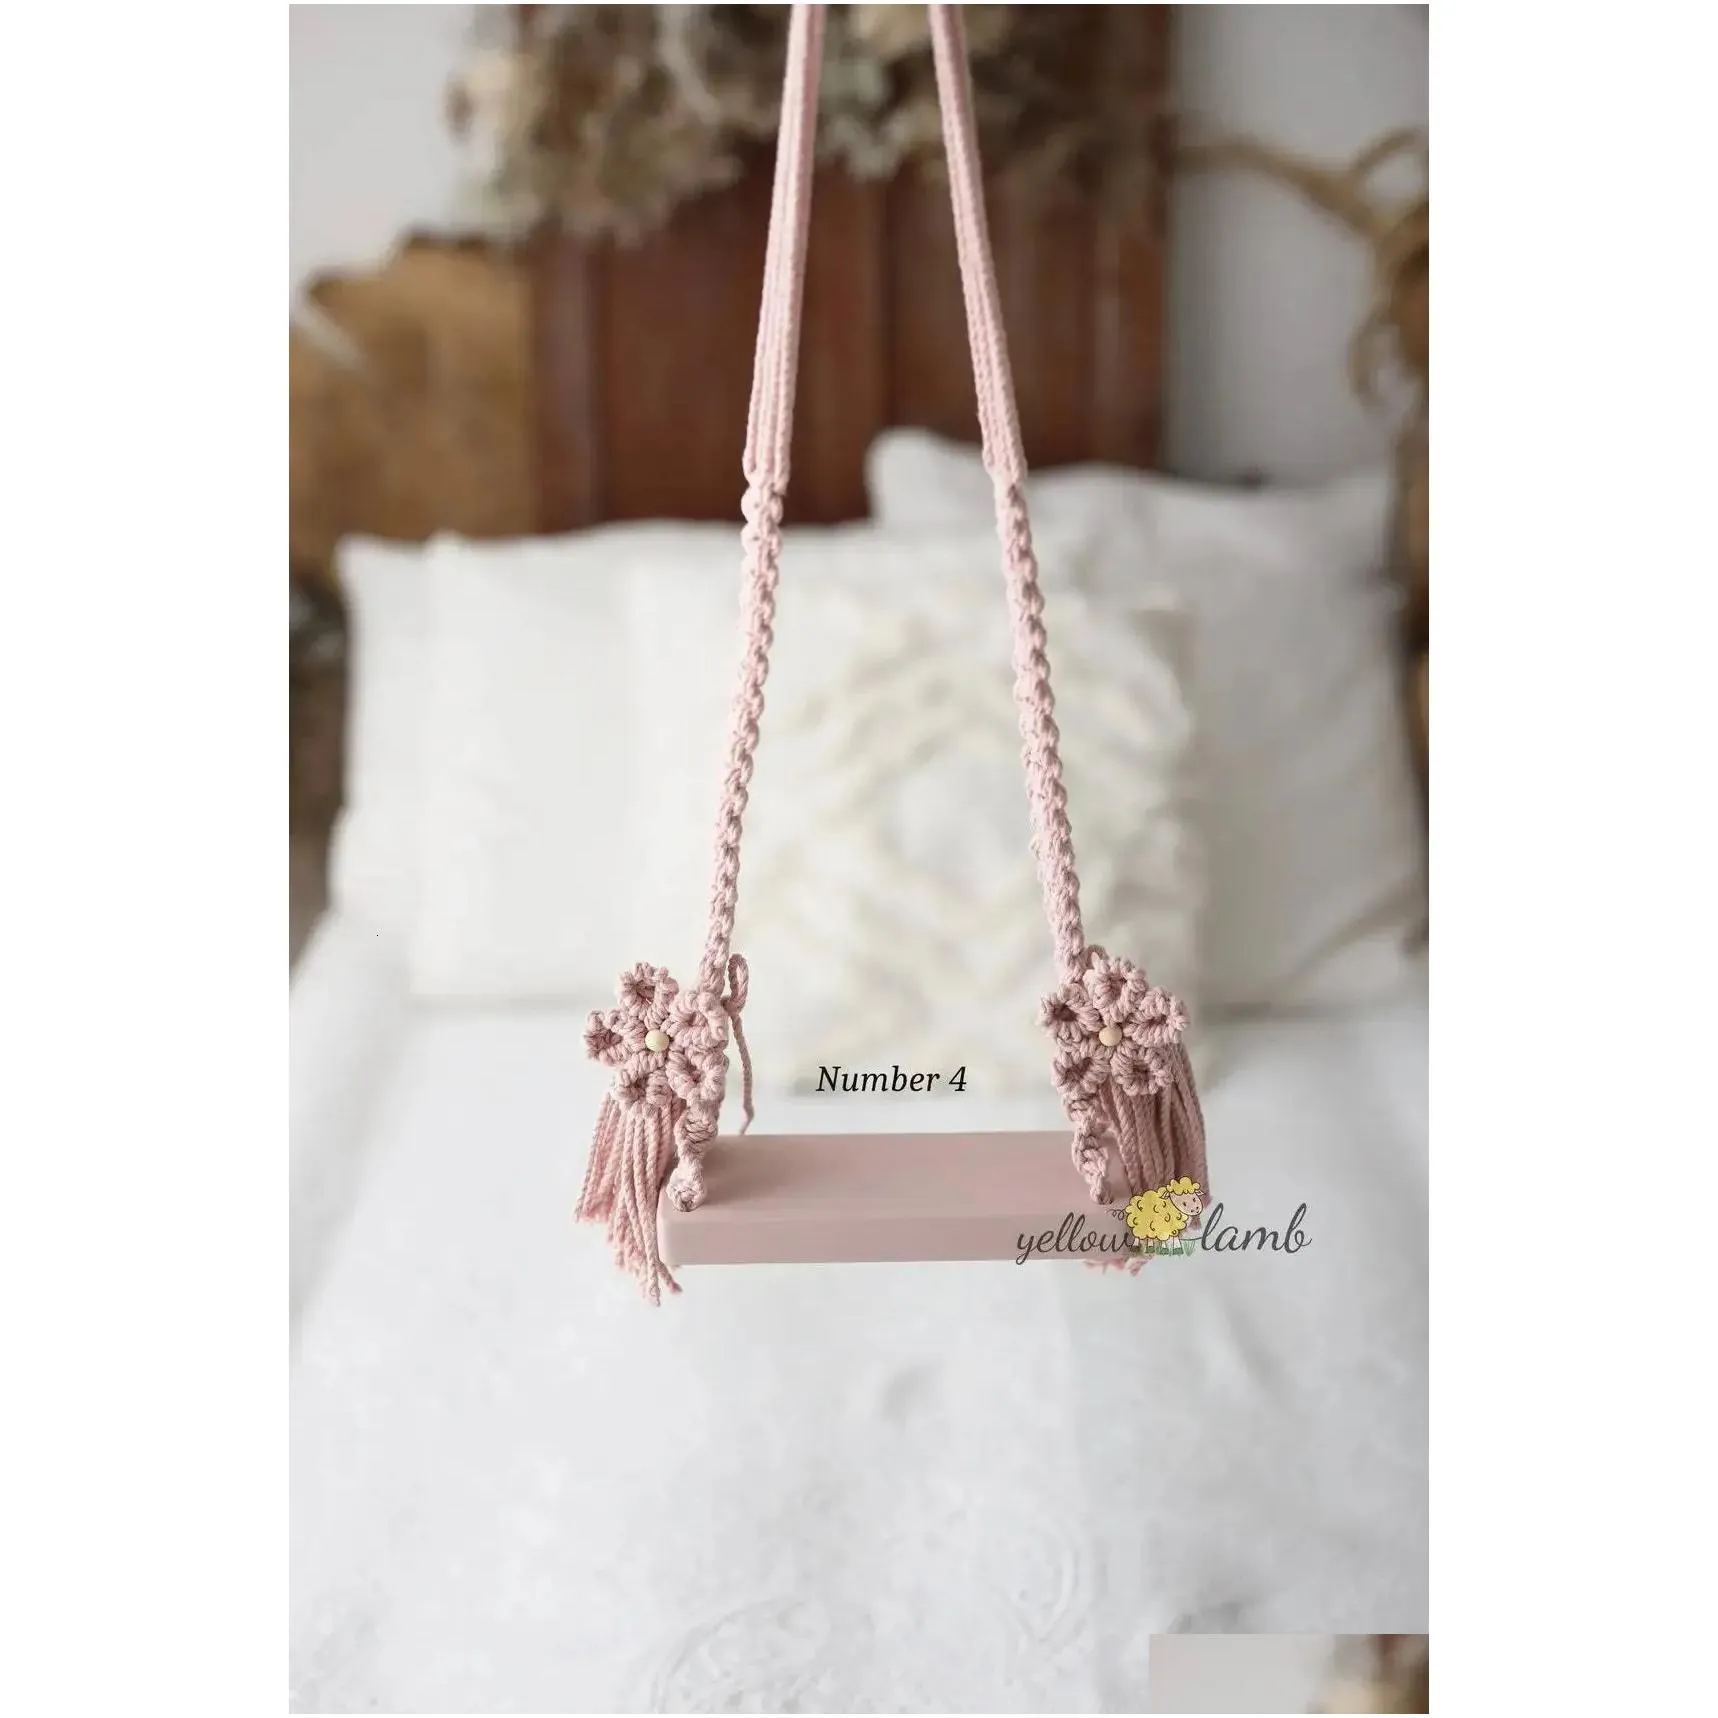 keepsakes born pography accessories wooden swing baby pography prop board born accessories souvenir colorful flower decoration 231017